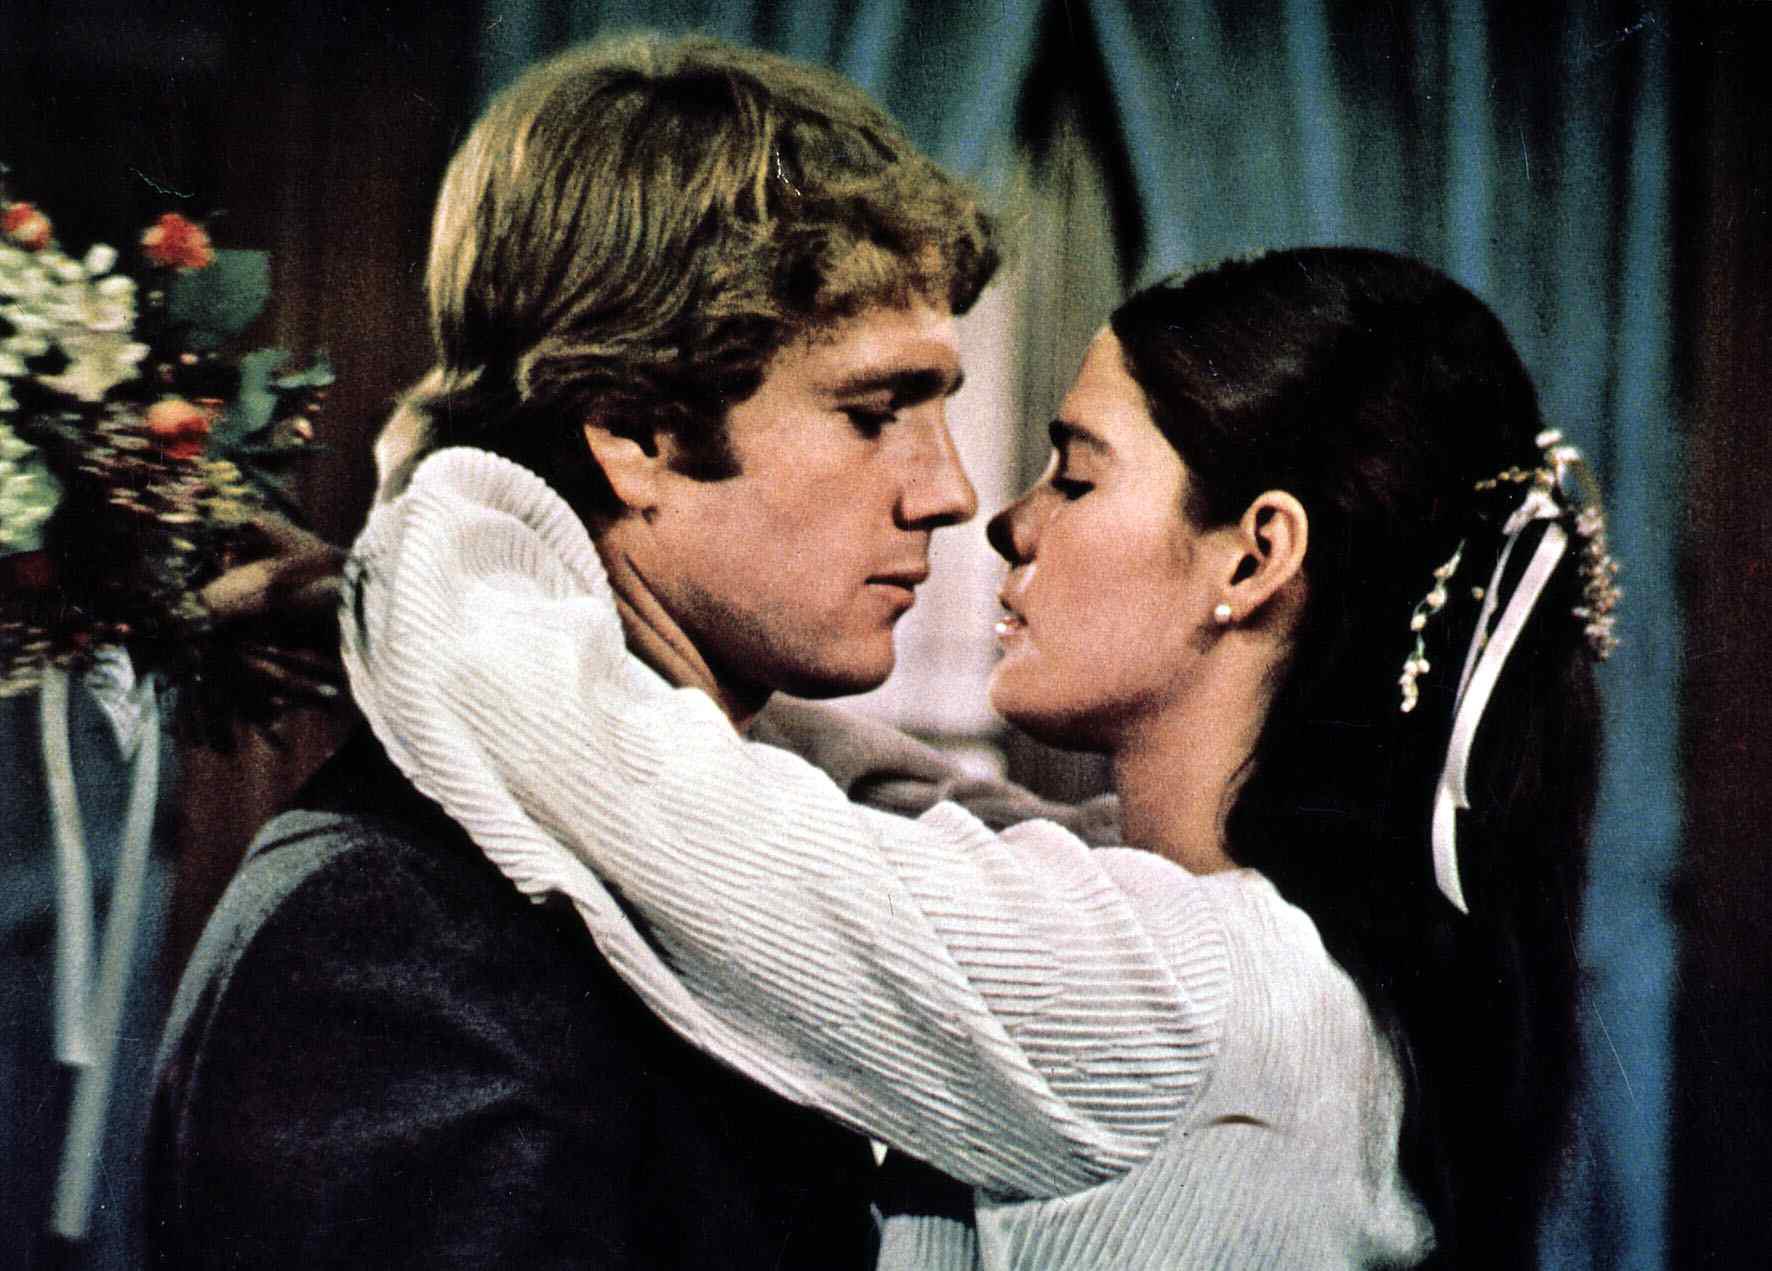 Ryan O'Neal and Ali MacGraw in "Love Story" in 1970 | Source: Getty Images